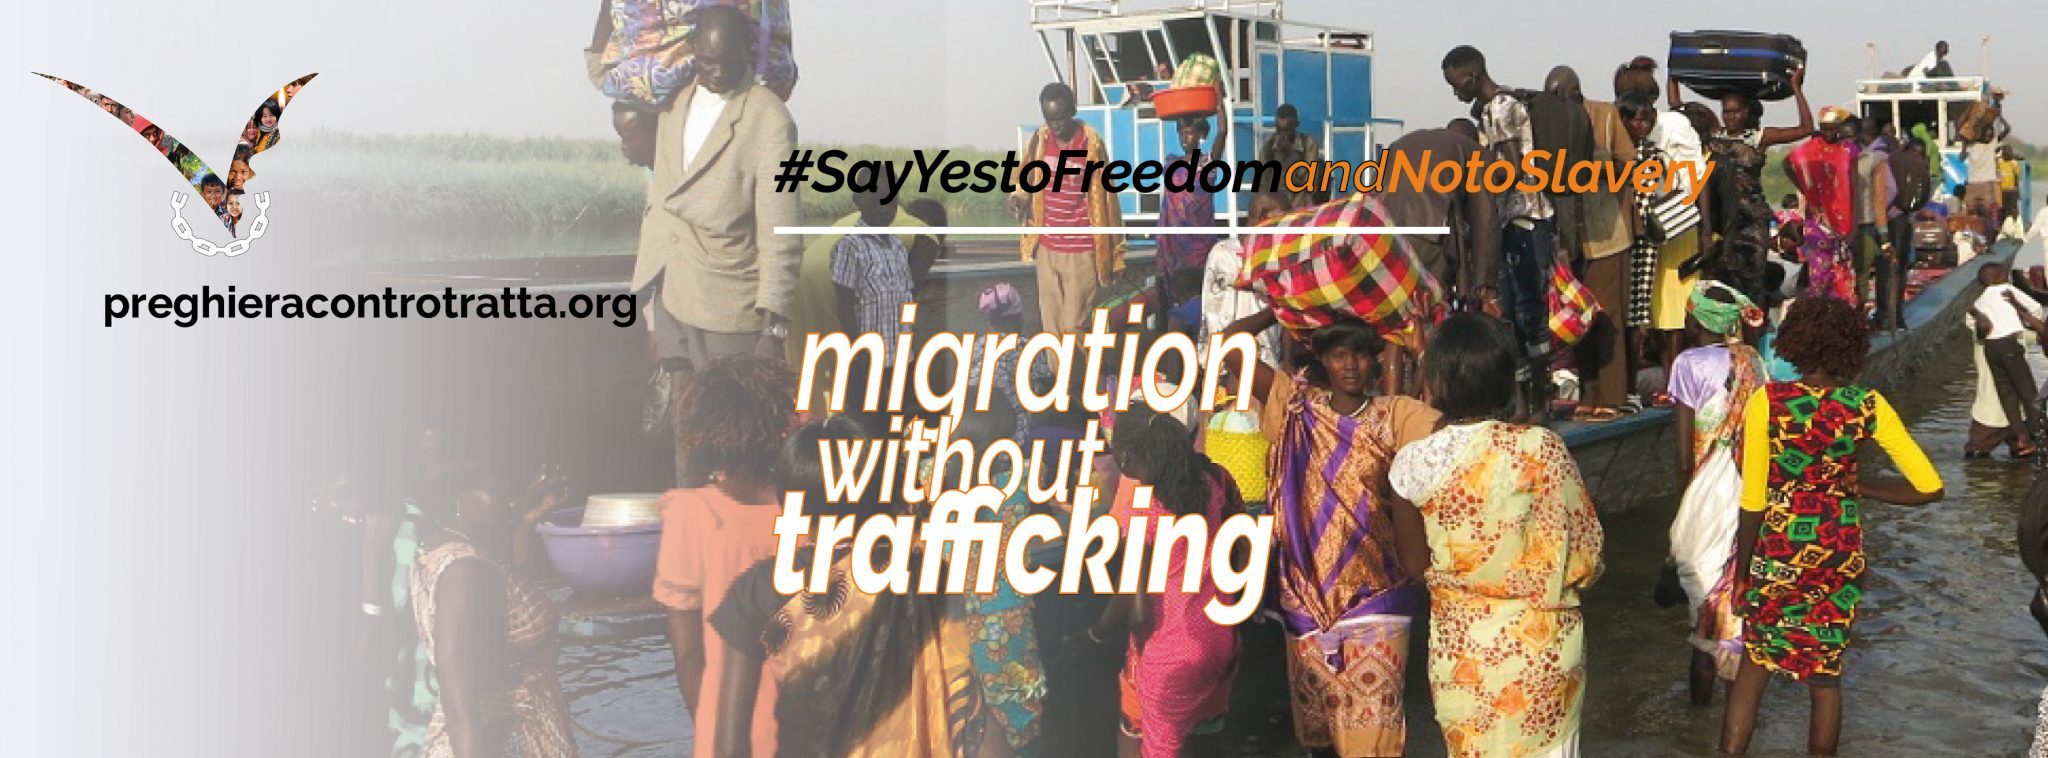 migration without trafficking